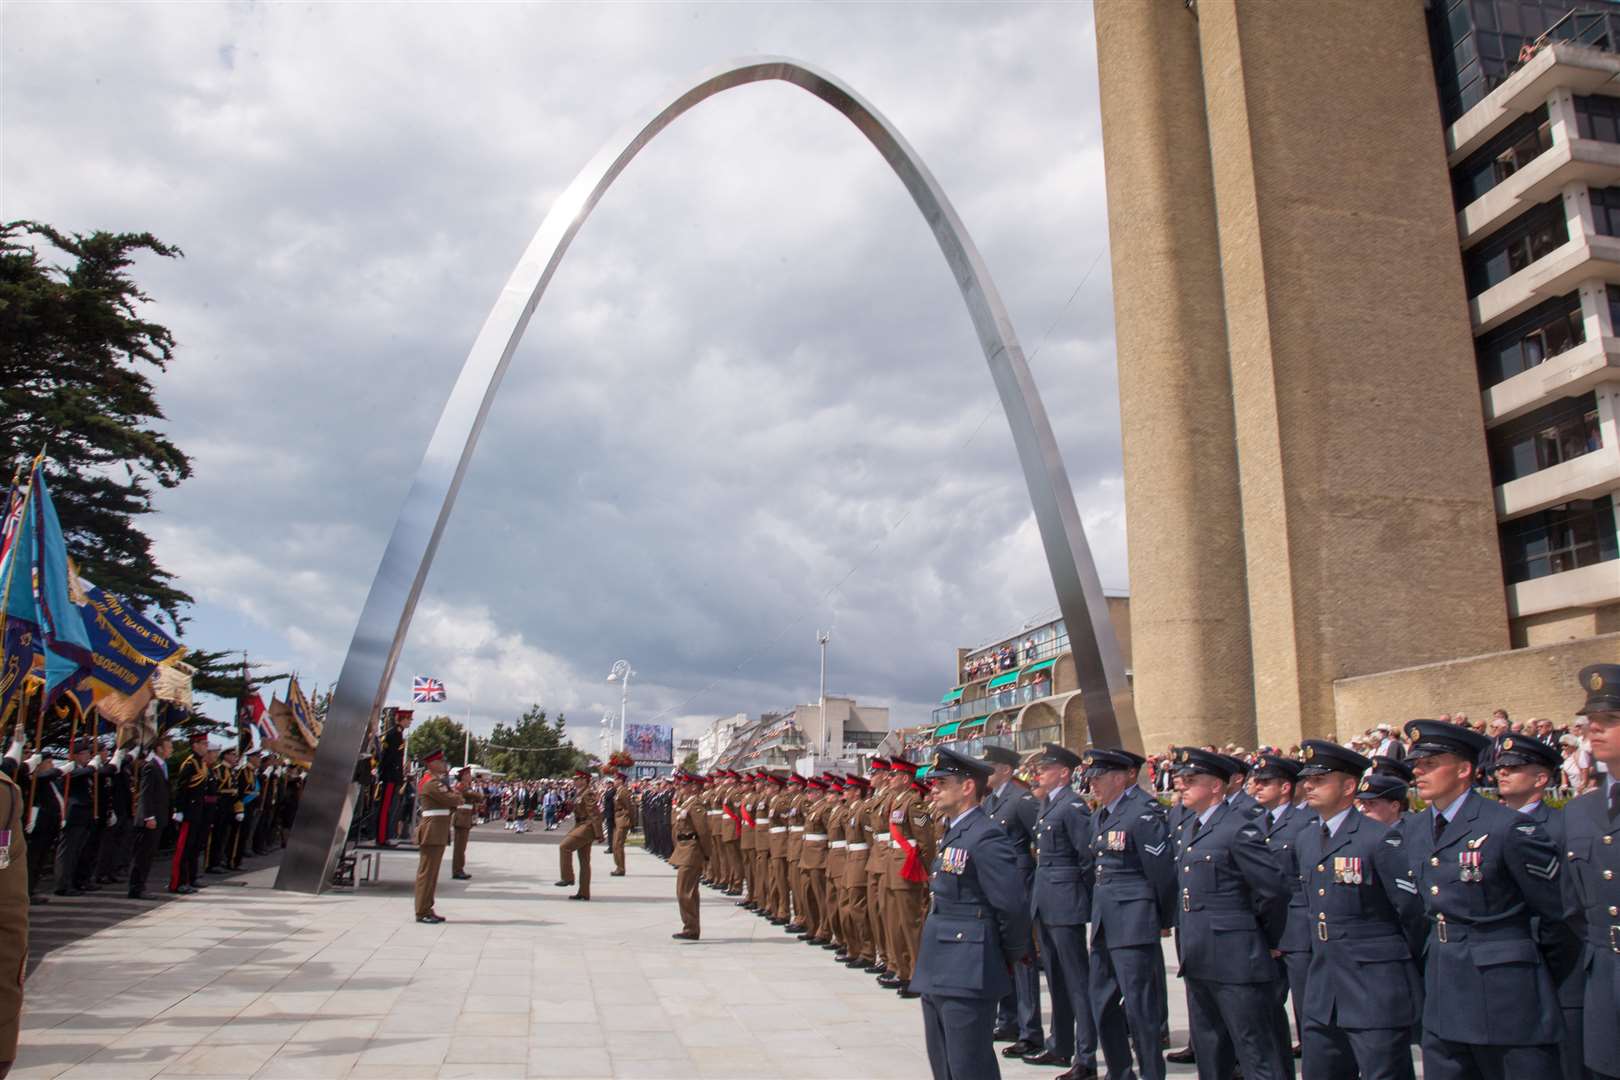 Walker Construction built the Memorial Arch in Folkestone unveiled by Prince Harry. Picture: Manu Palomeque/LNP